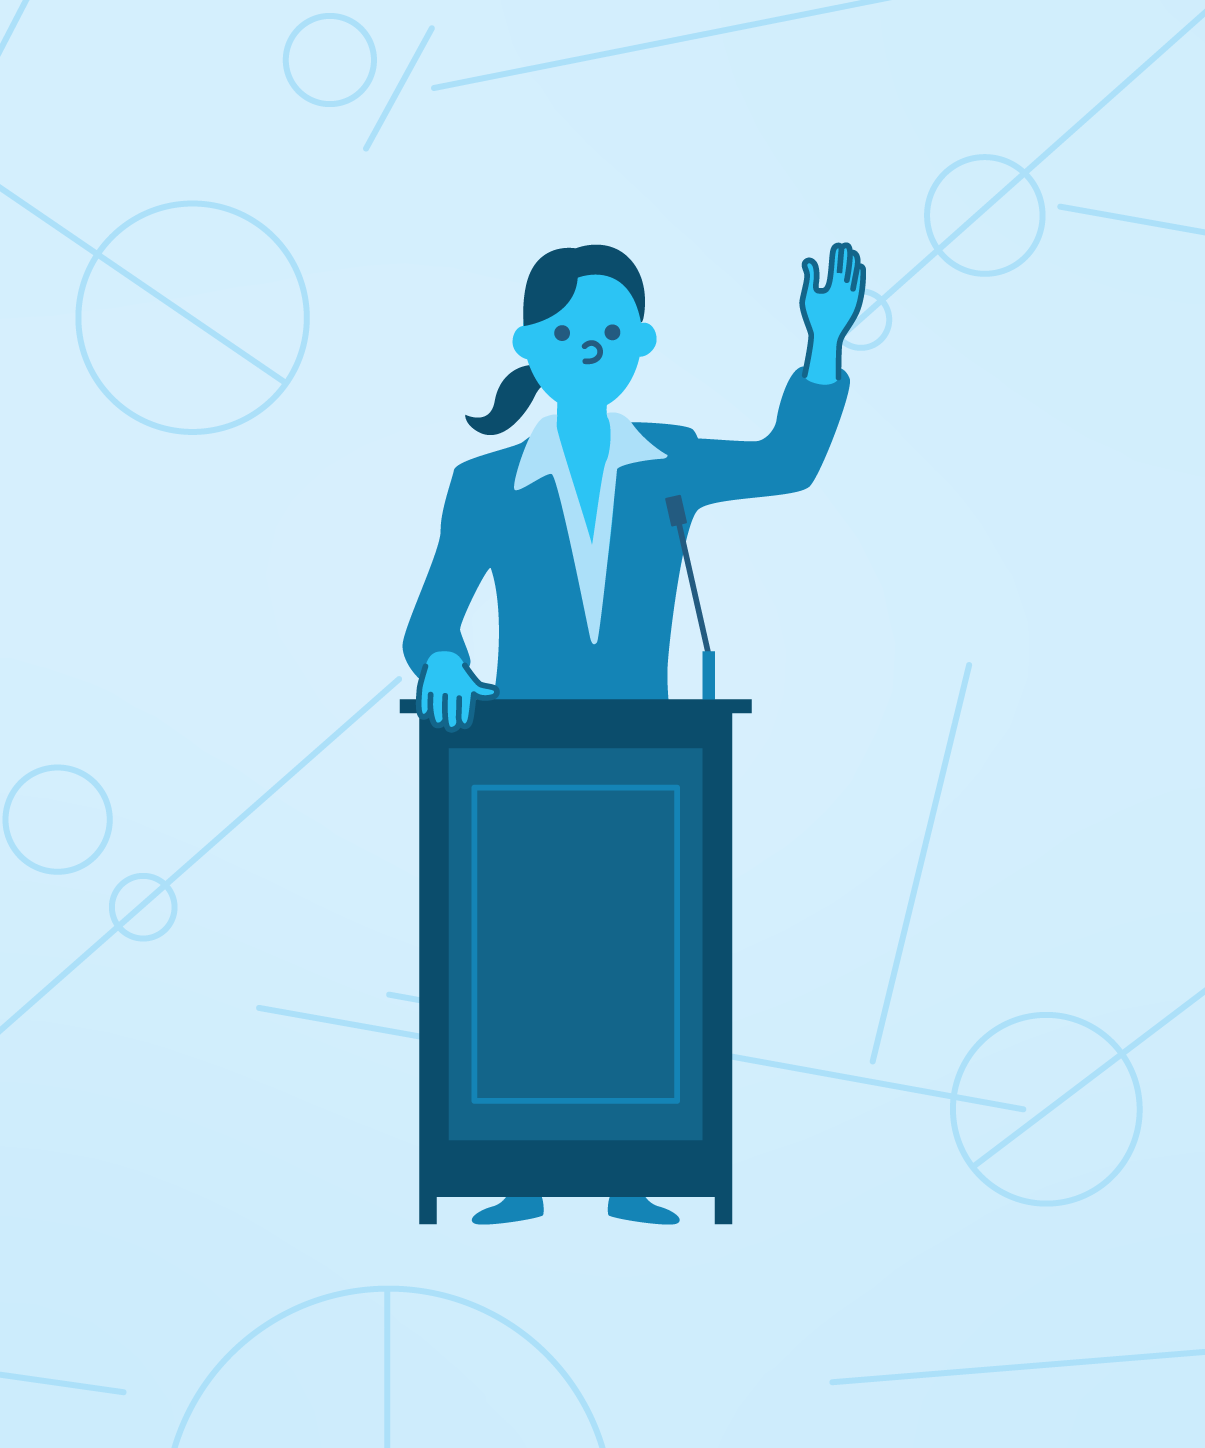 Illustration of a woman giving a speech behind a podium